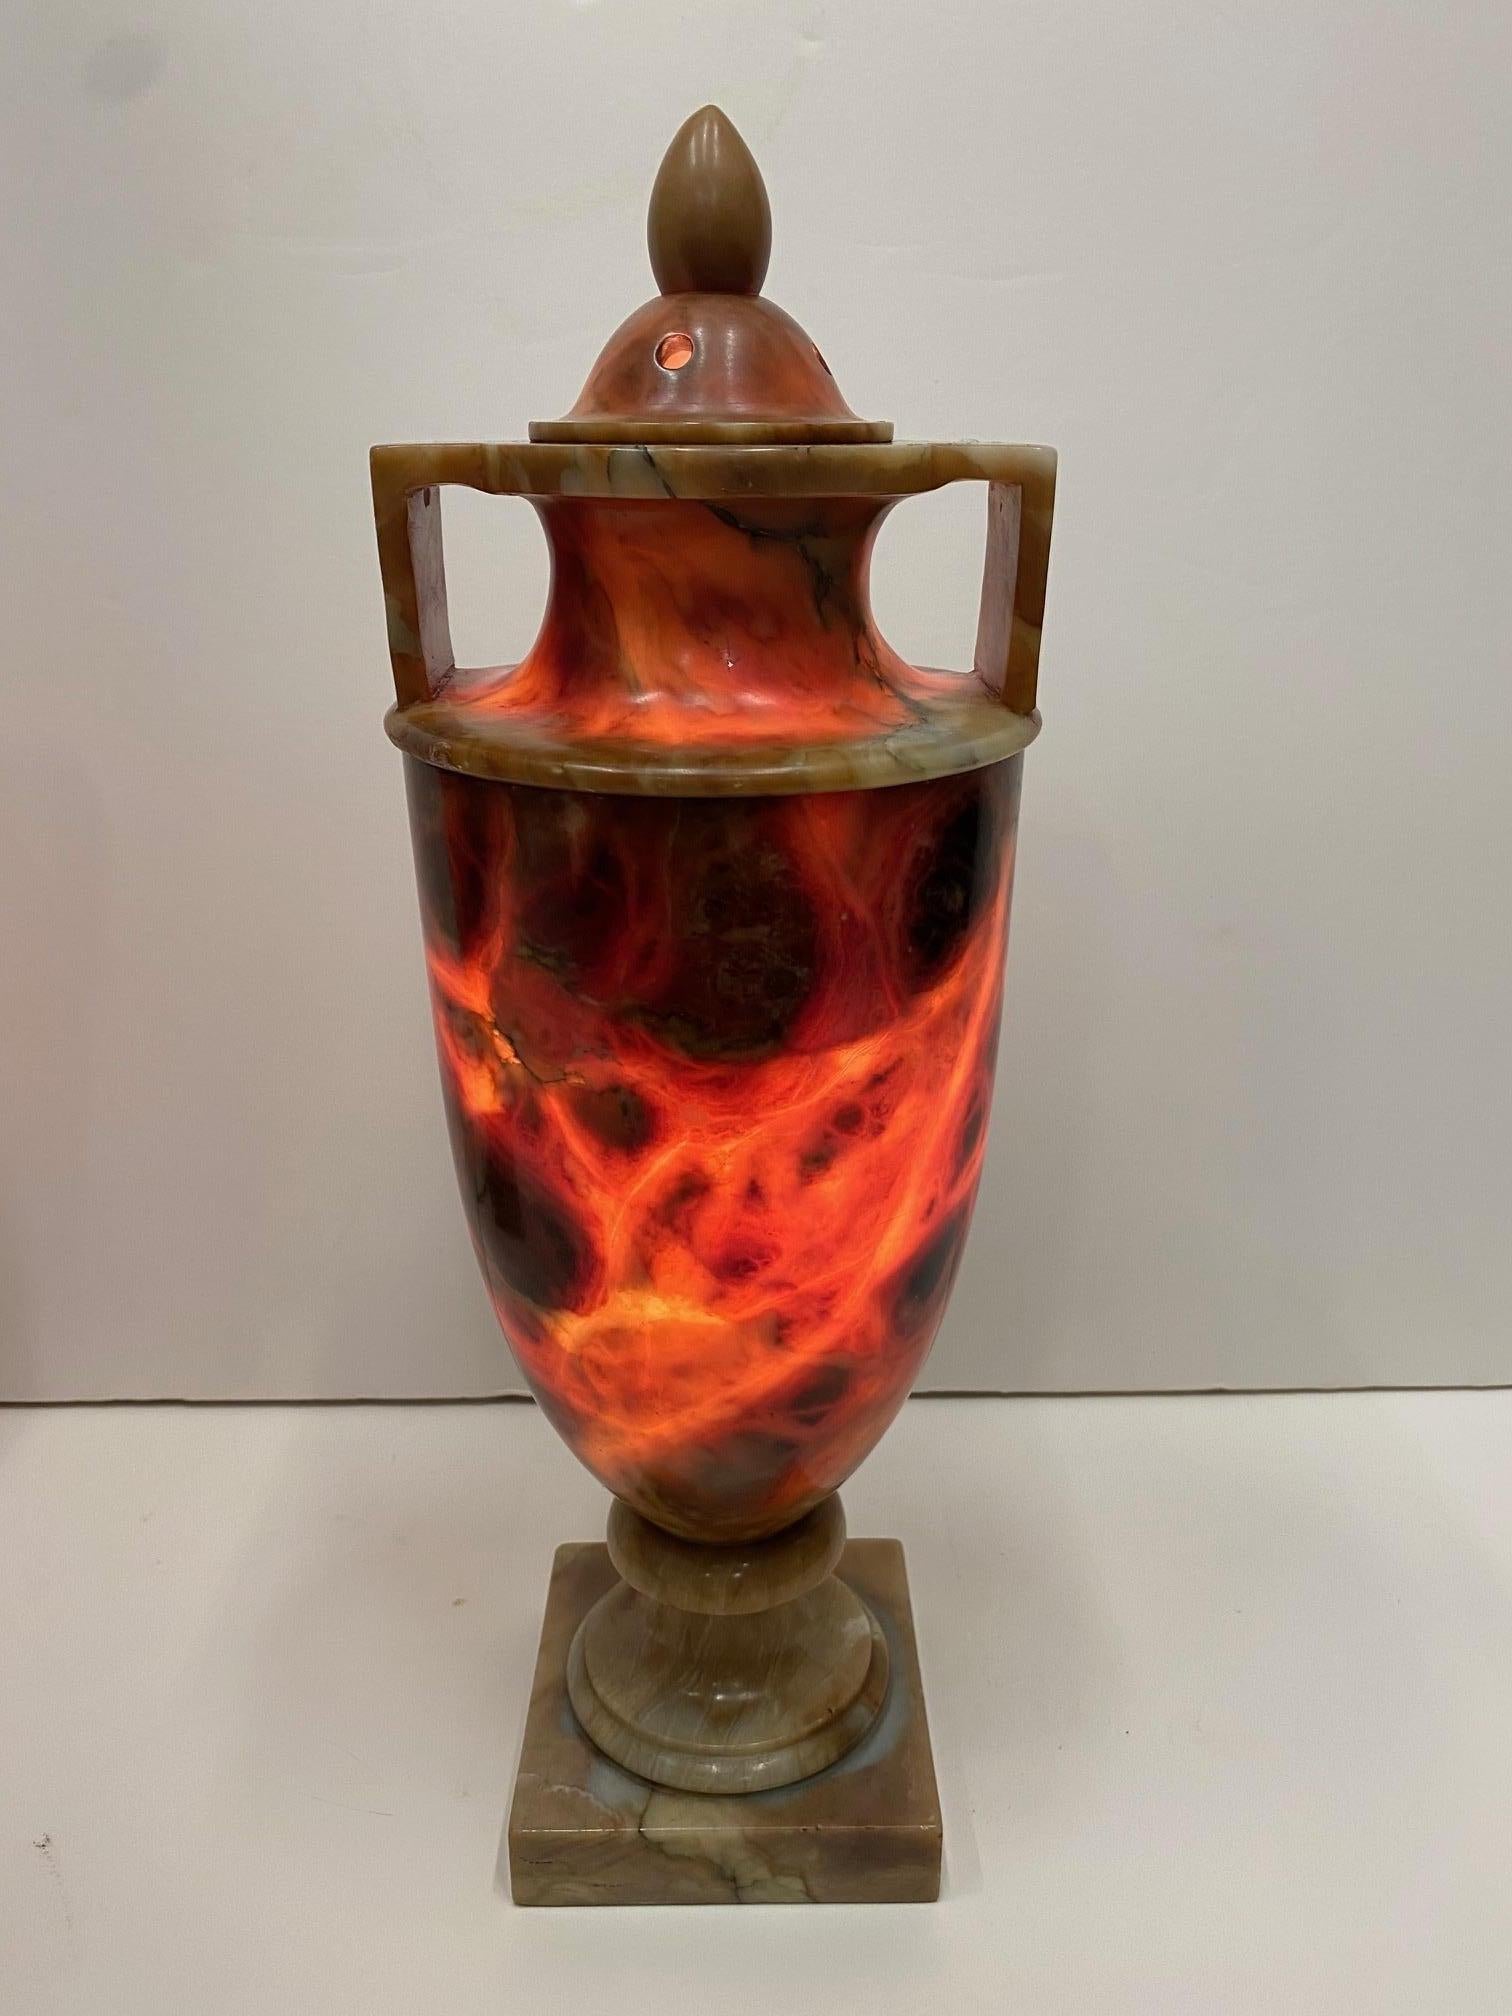 A pair of incredible urn lamps that are beautiful as sculptural accessories whether unlit or illuminated, but when lit they become glowing embers with startlingly lovely colors.
Newly rewired.